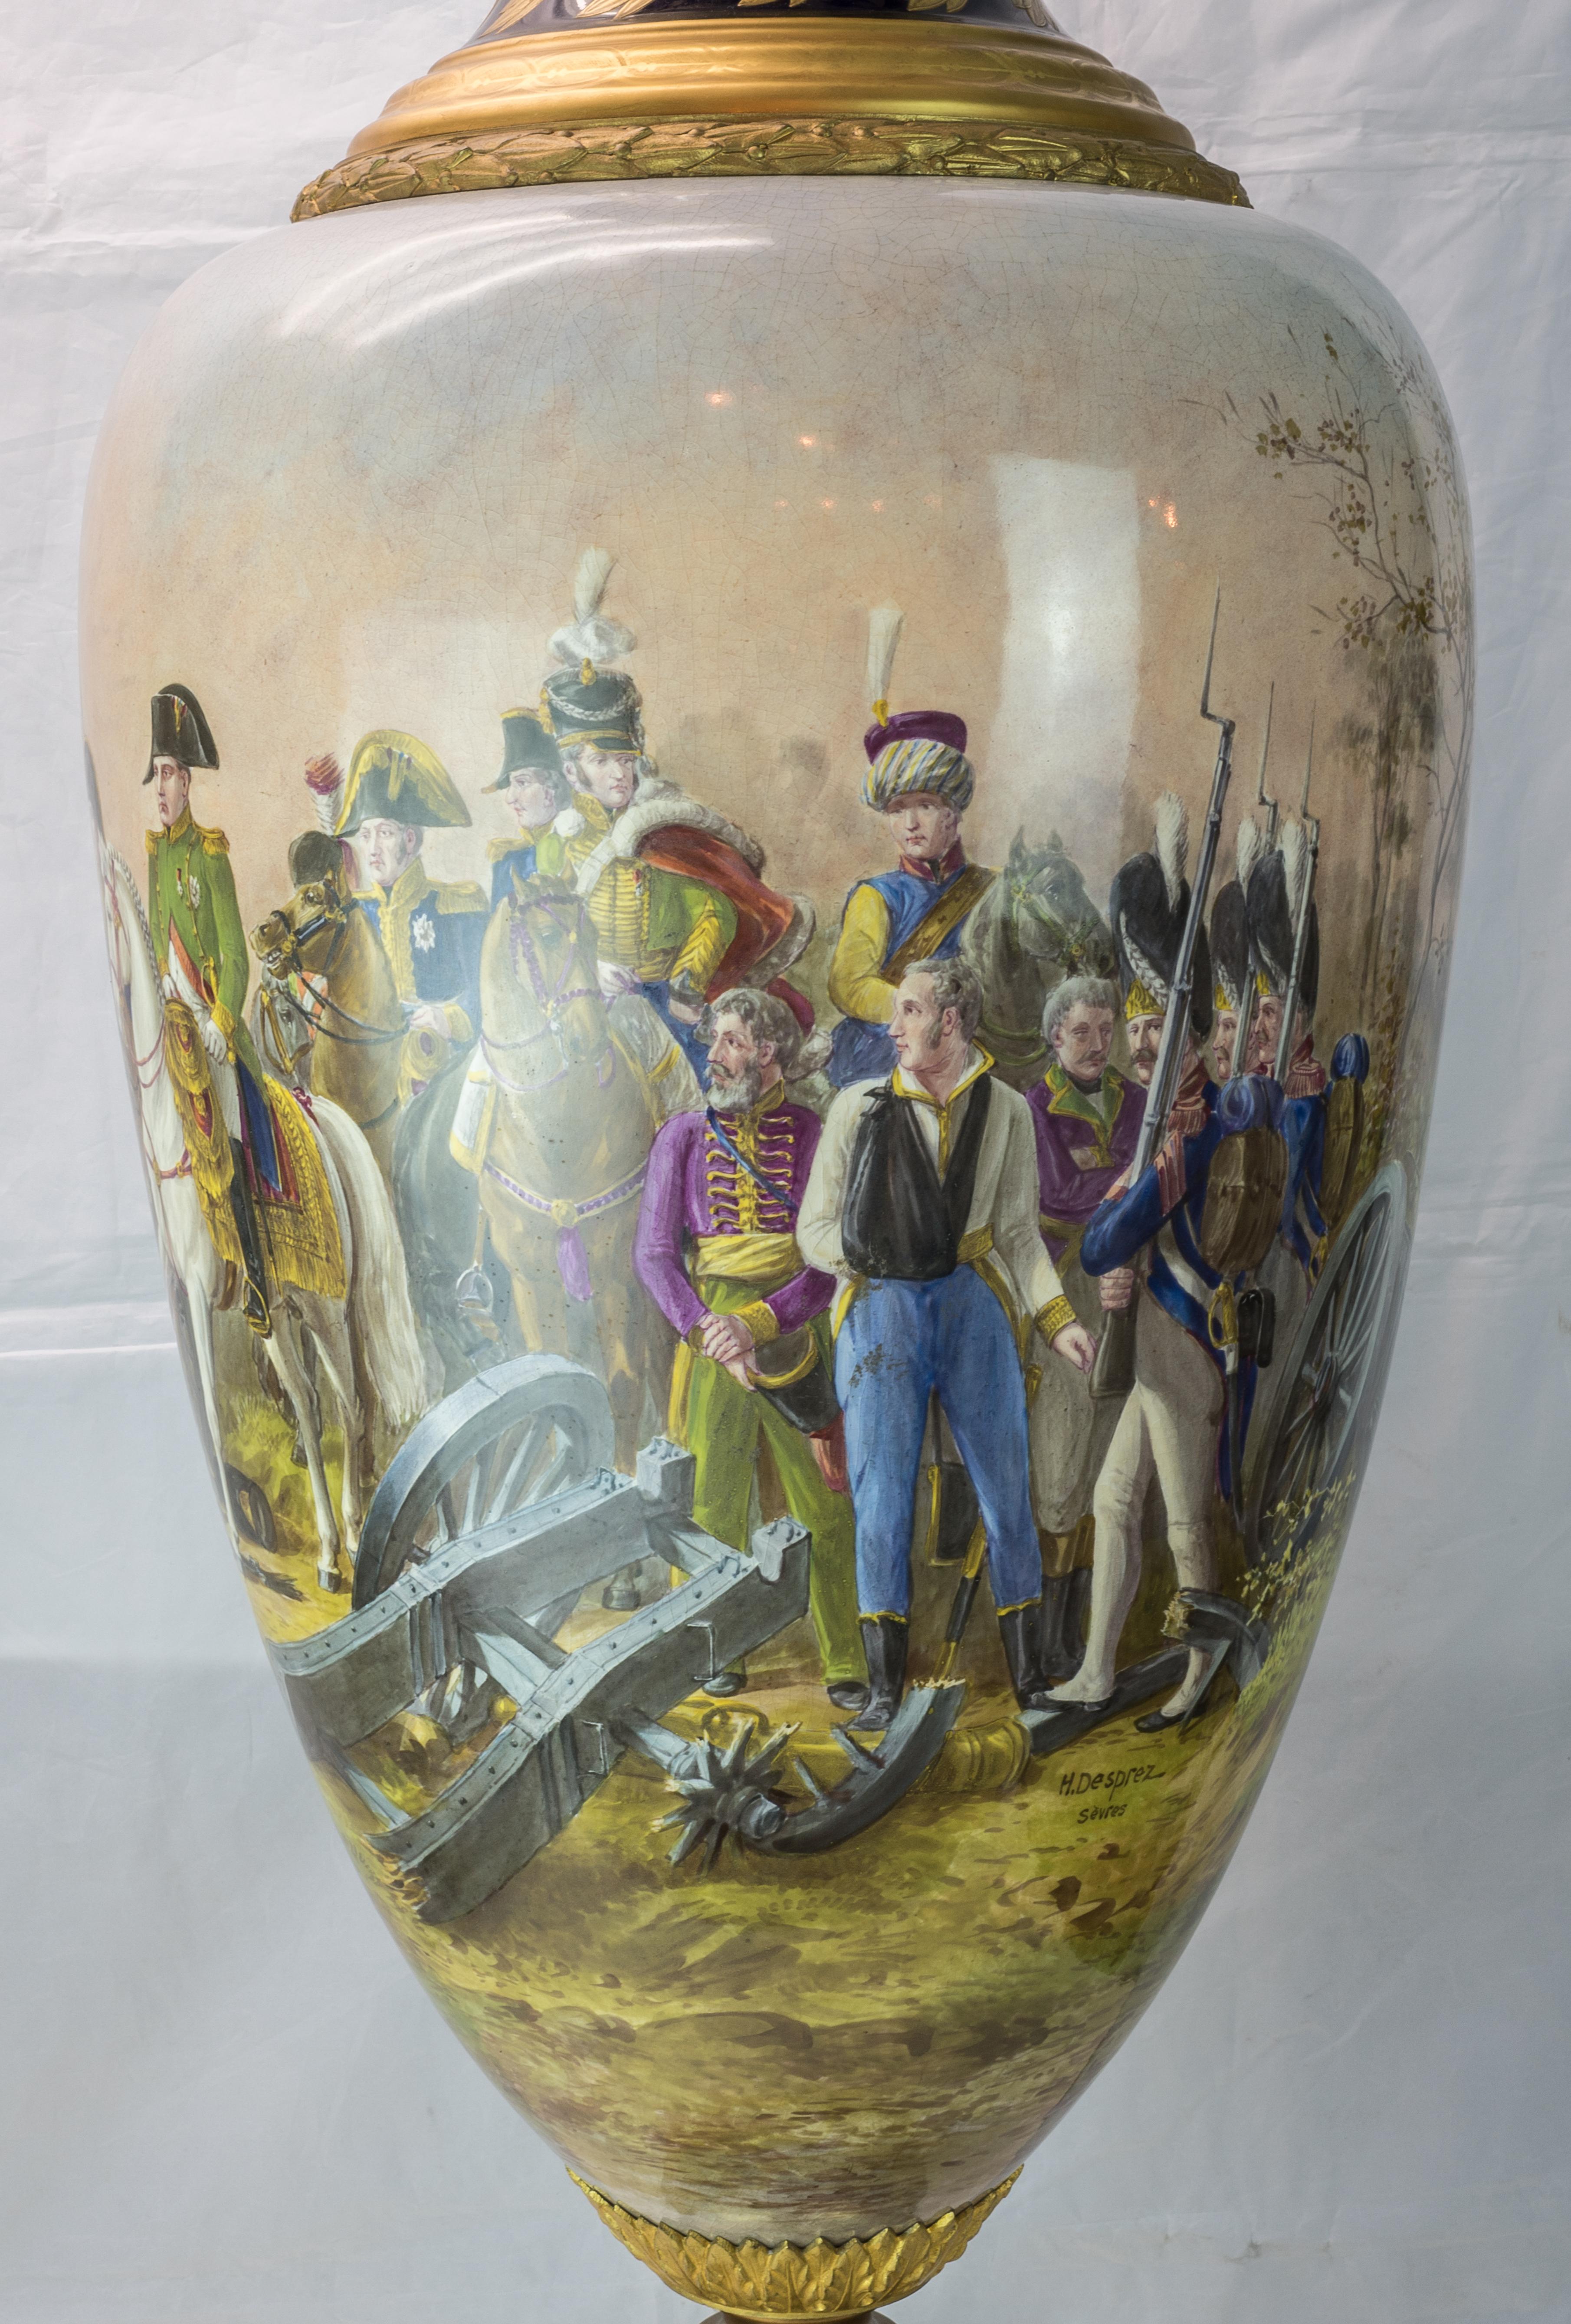 Monumental Pair of Sèvres style Porcelain hand painted cobalt ground Napoleonic vases and cover
The bodies well-painted to show cavalry scenes from the Napoleonic wars, the necks with large crowned initial 